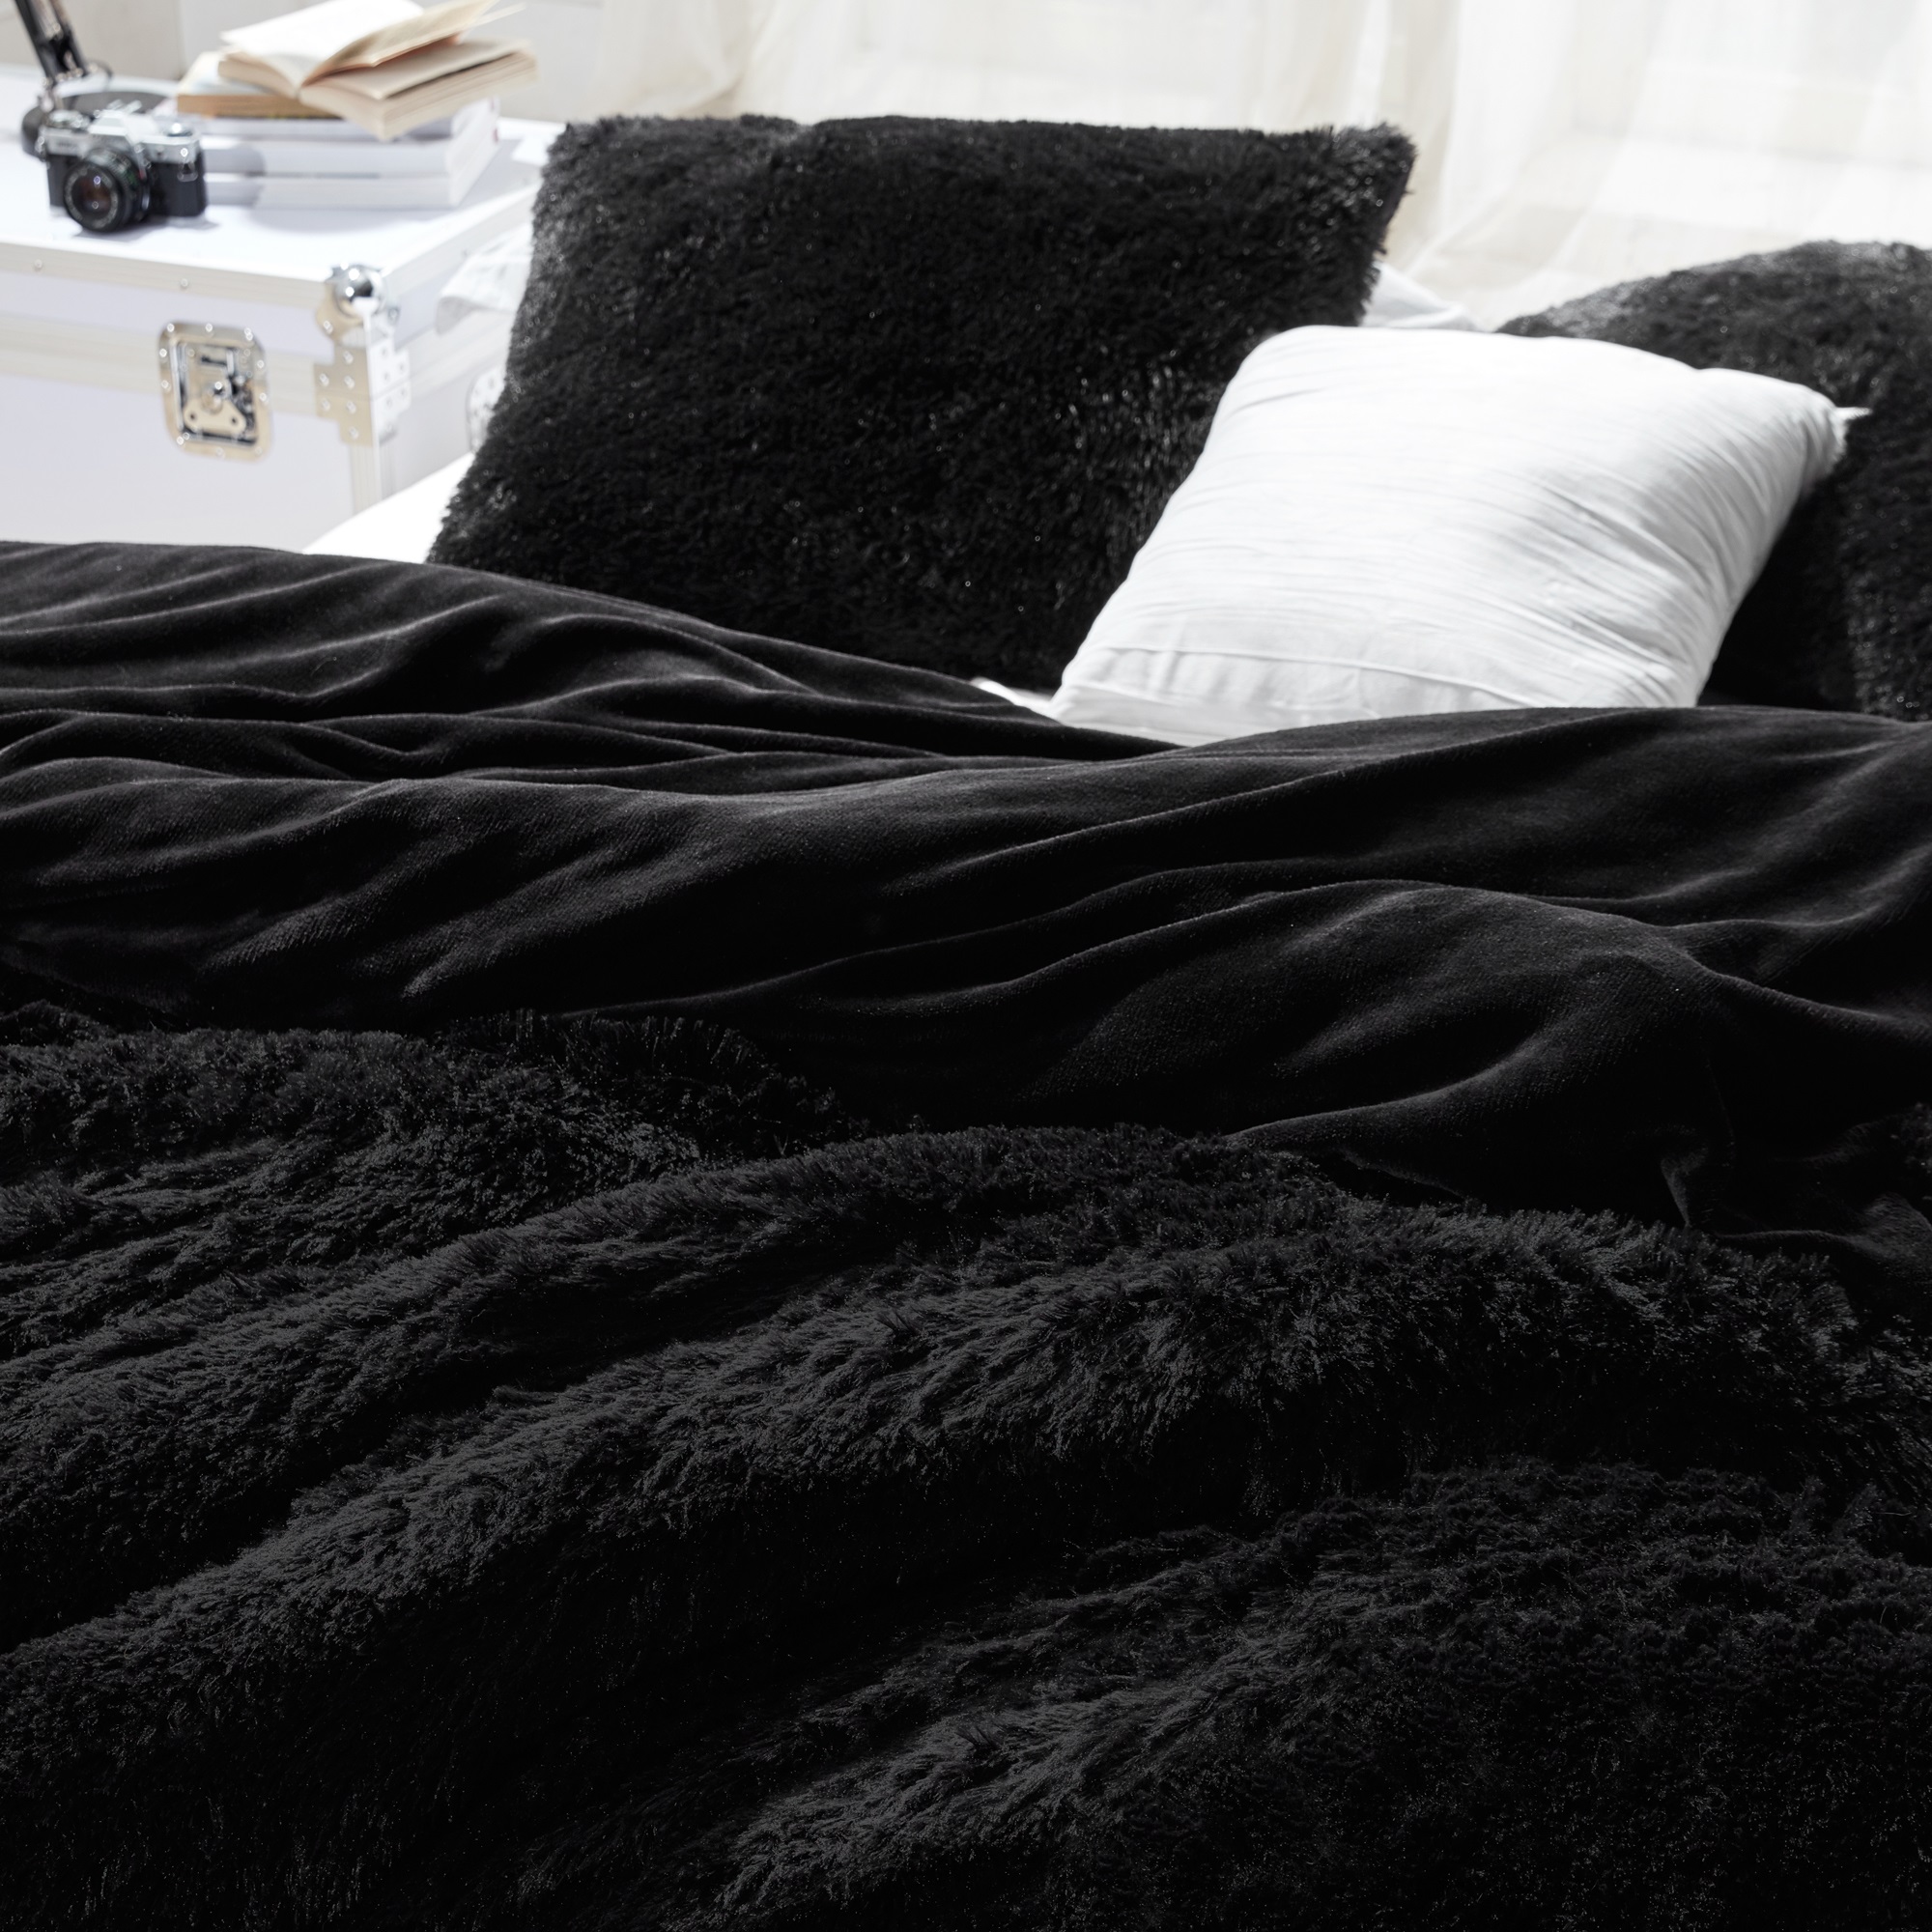 Coma Inducer Duvet Cover - Are You Kidding? - Black